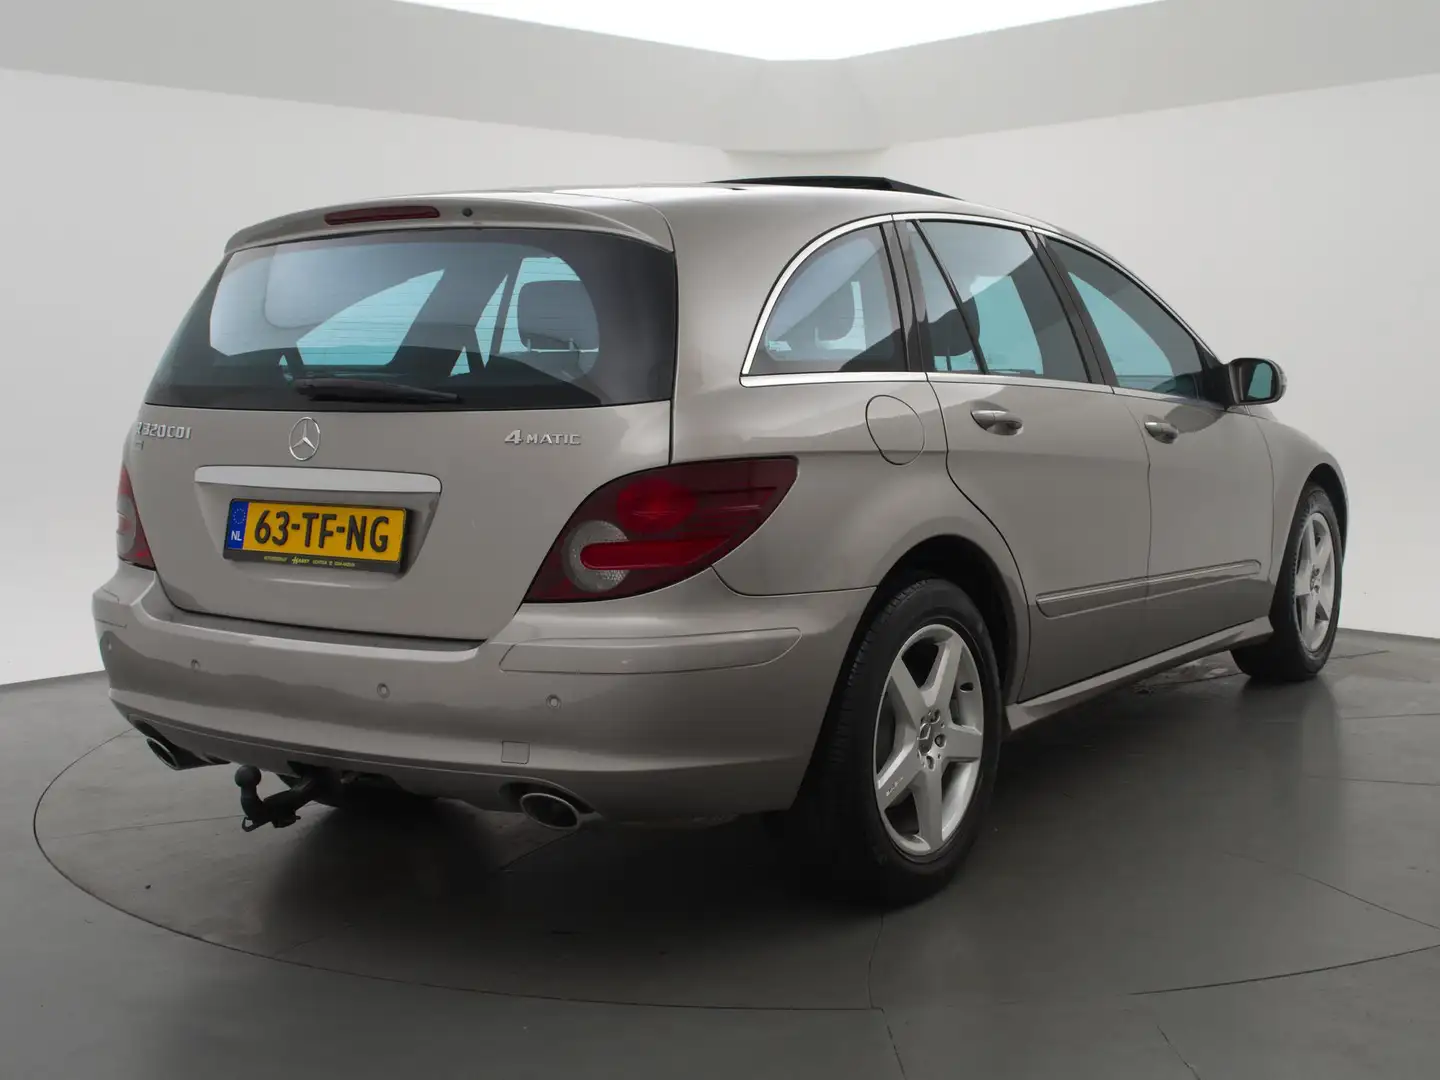 Mercedes-Benz R 320 CDI 4-MATIC 6-PERS. *184.762 KM* YOUNGTIMER Grey - 2